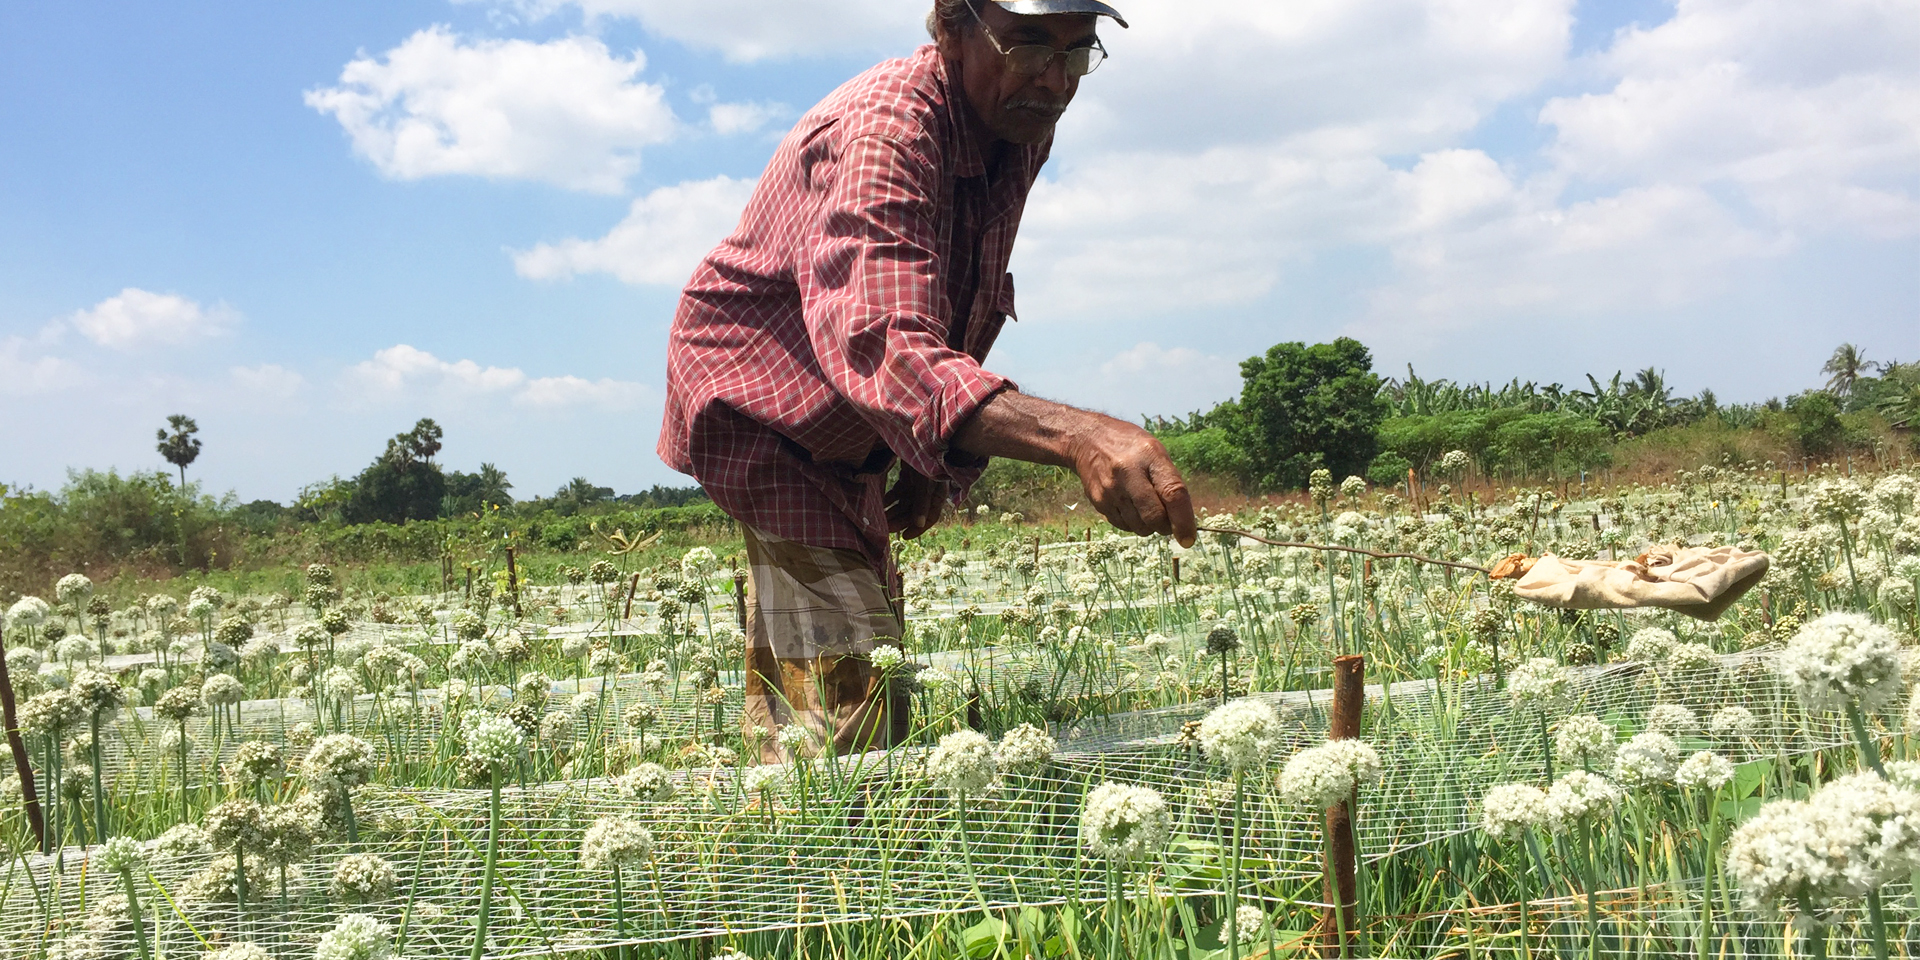 An older man examining crops protected by a wire mesh.